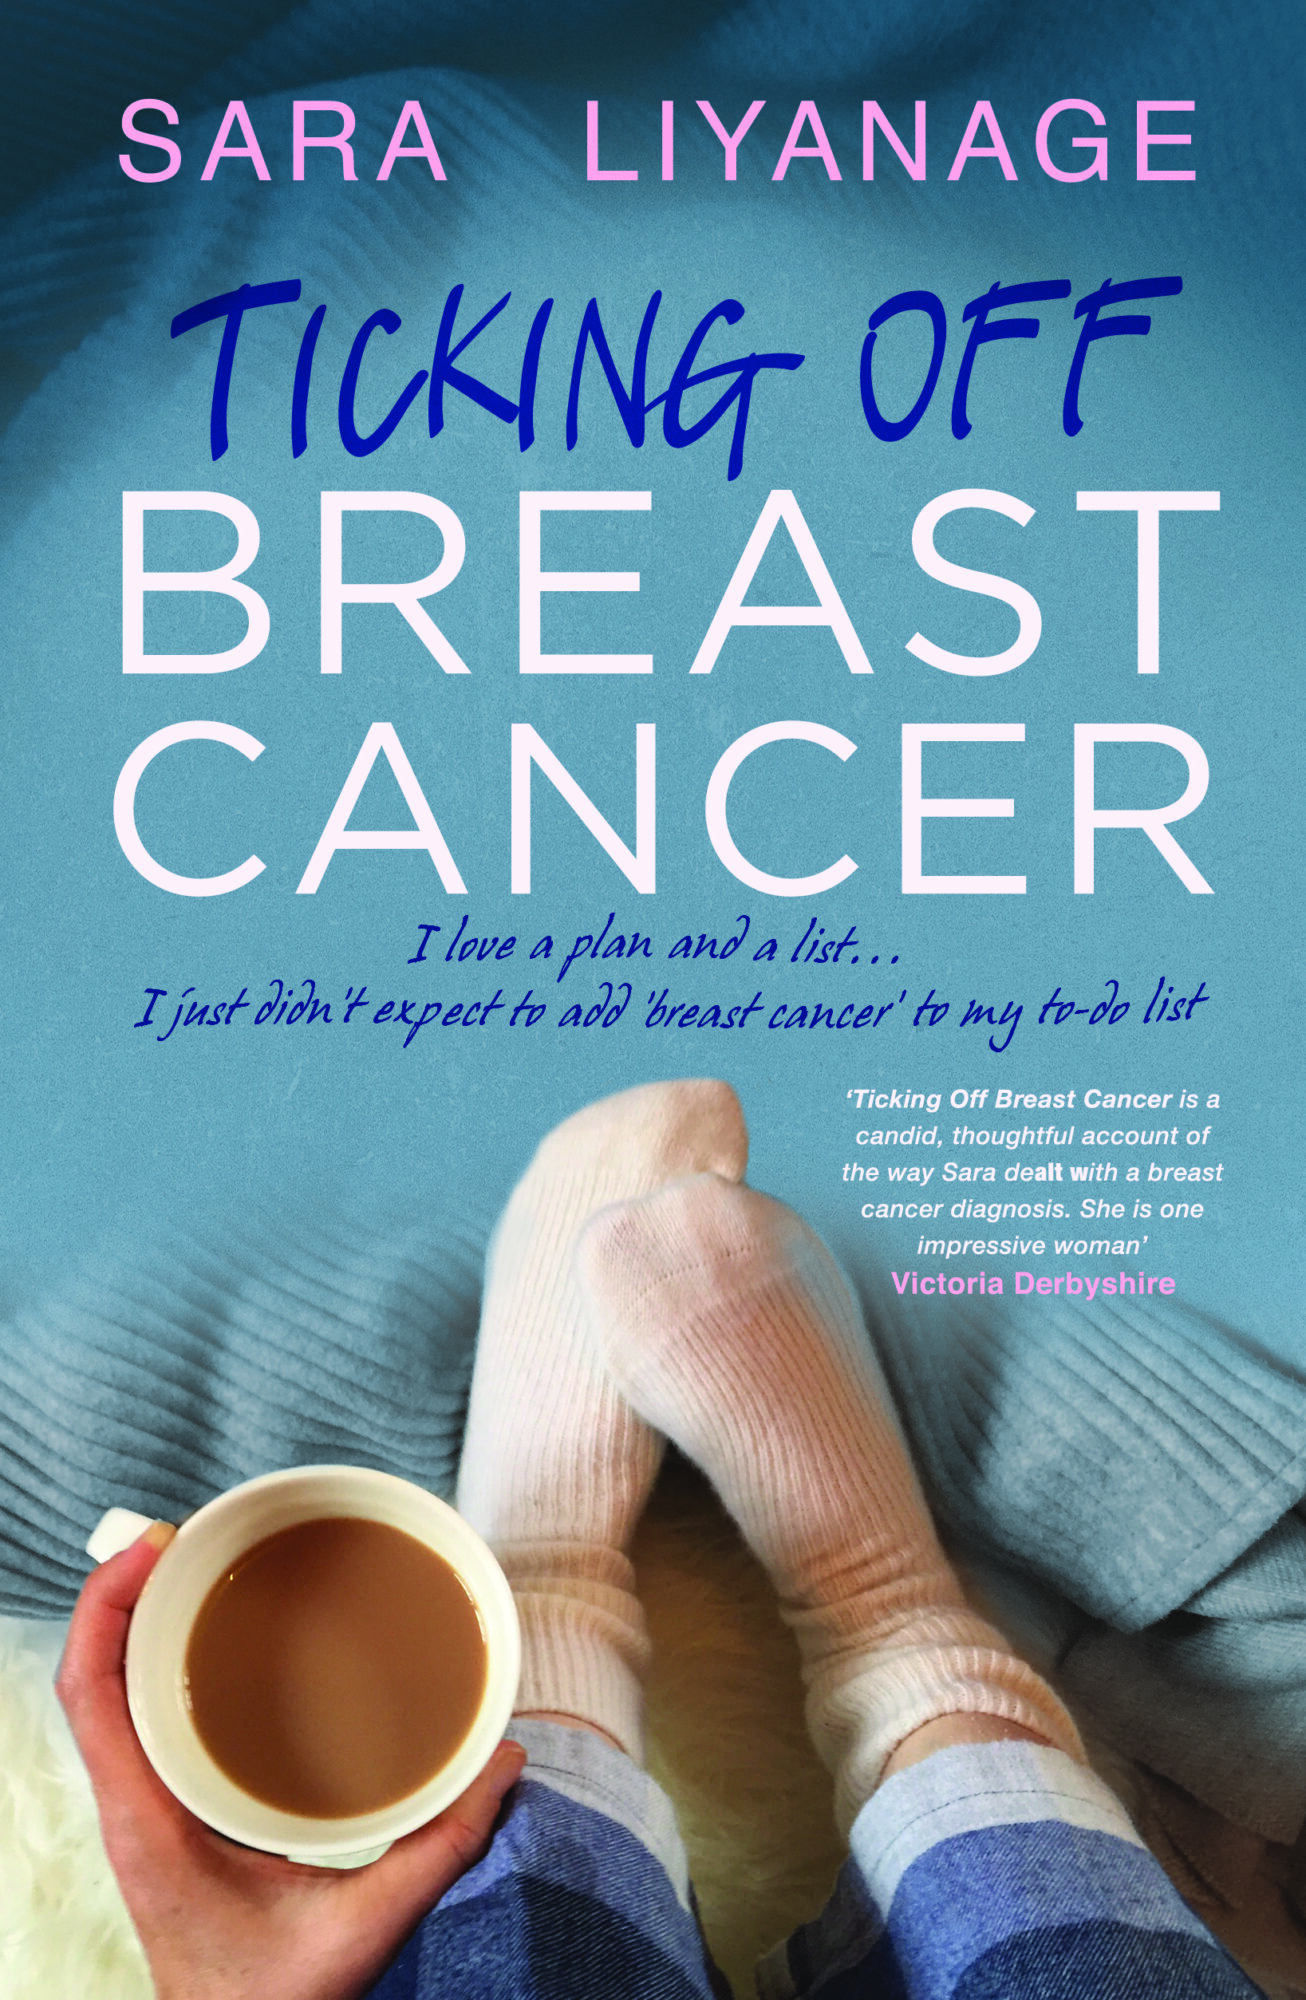 Ticking off Breast Cancer - by Sarah LiyanageTicking off Breast Cancer - by Sarah Liyanage